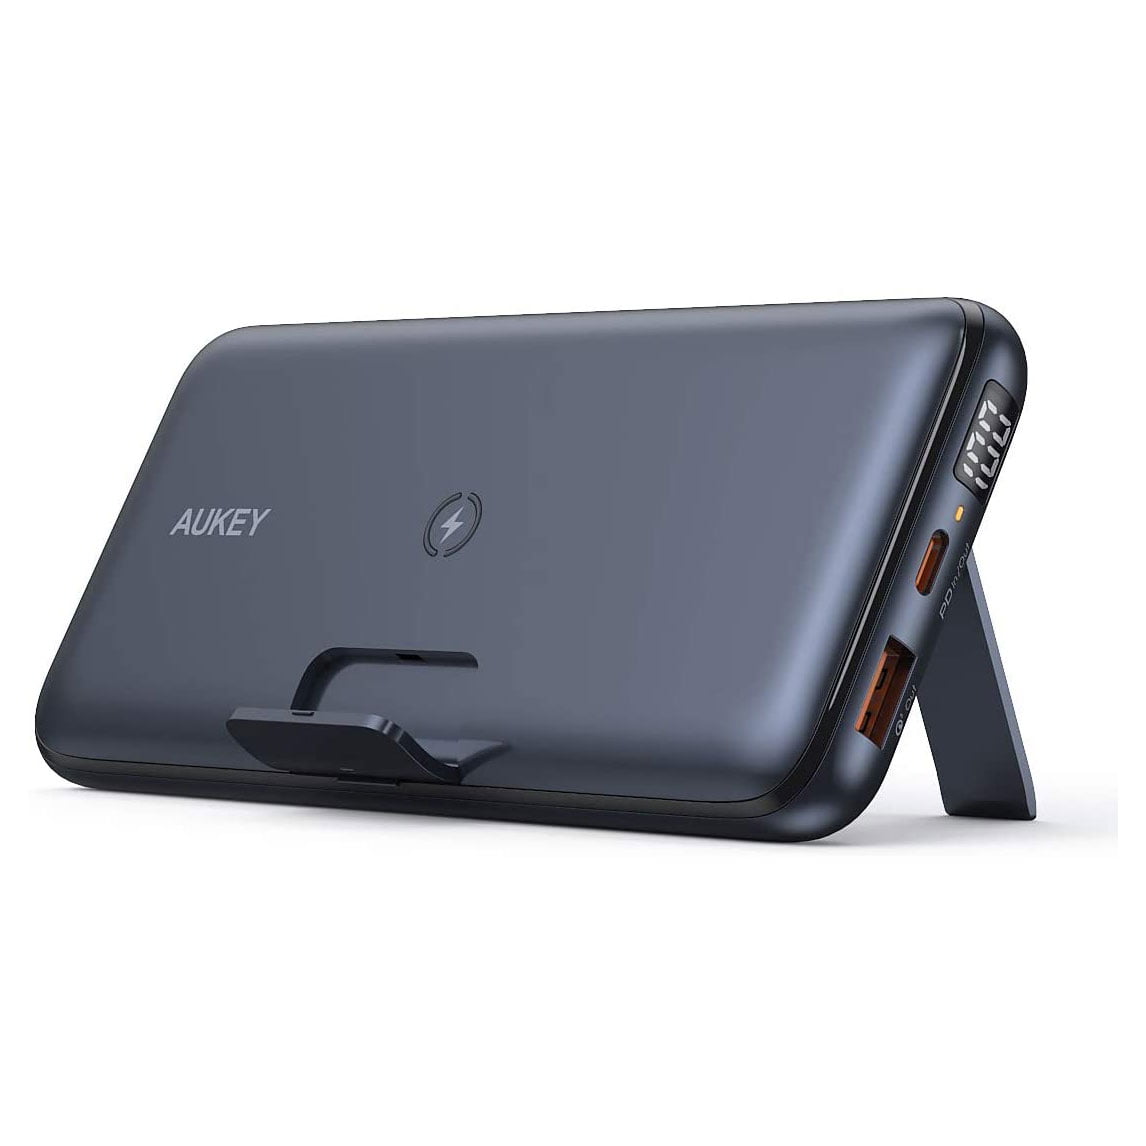 Aukey 20000mAh Powerbank + Wireless Charger, Type-C Power Bank PD 3.0 Foldable Stand, Quick Charge 3.0